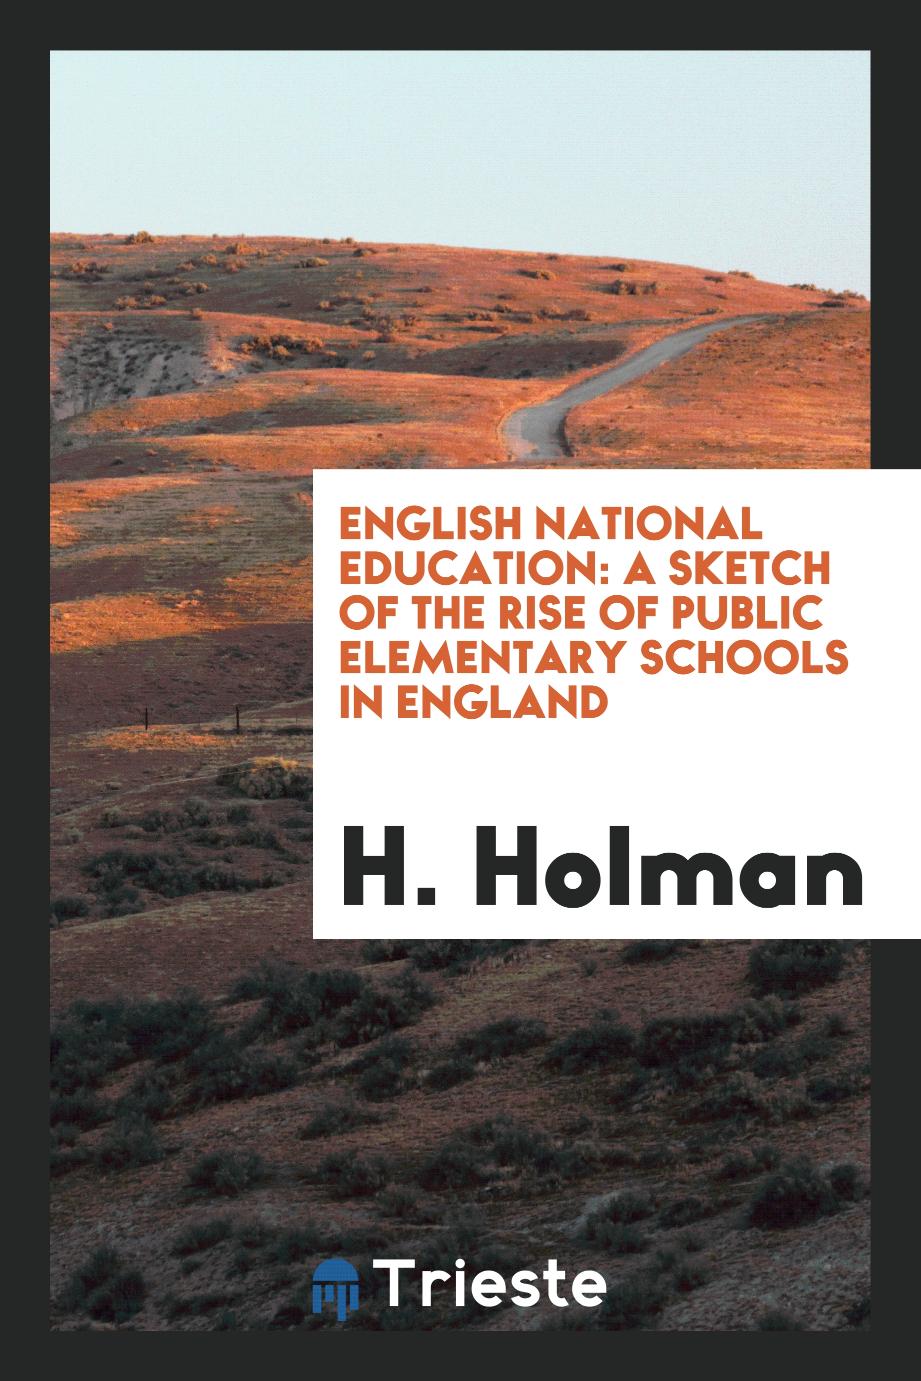 English national education: a sketch of the rise of public elementary schools in England